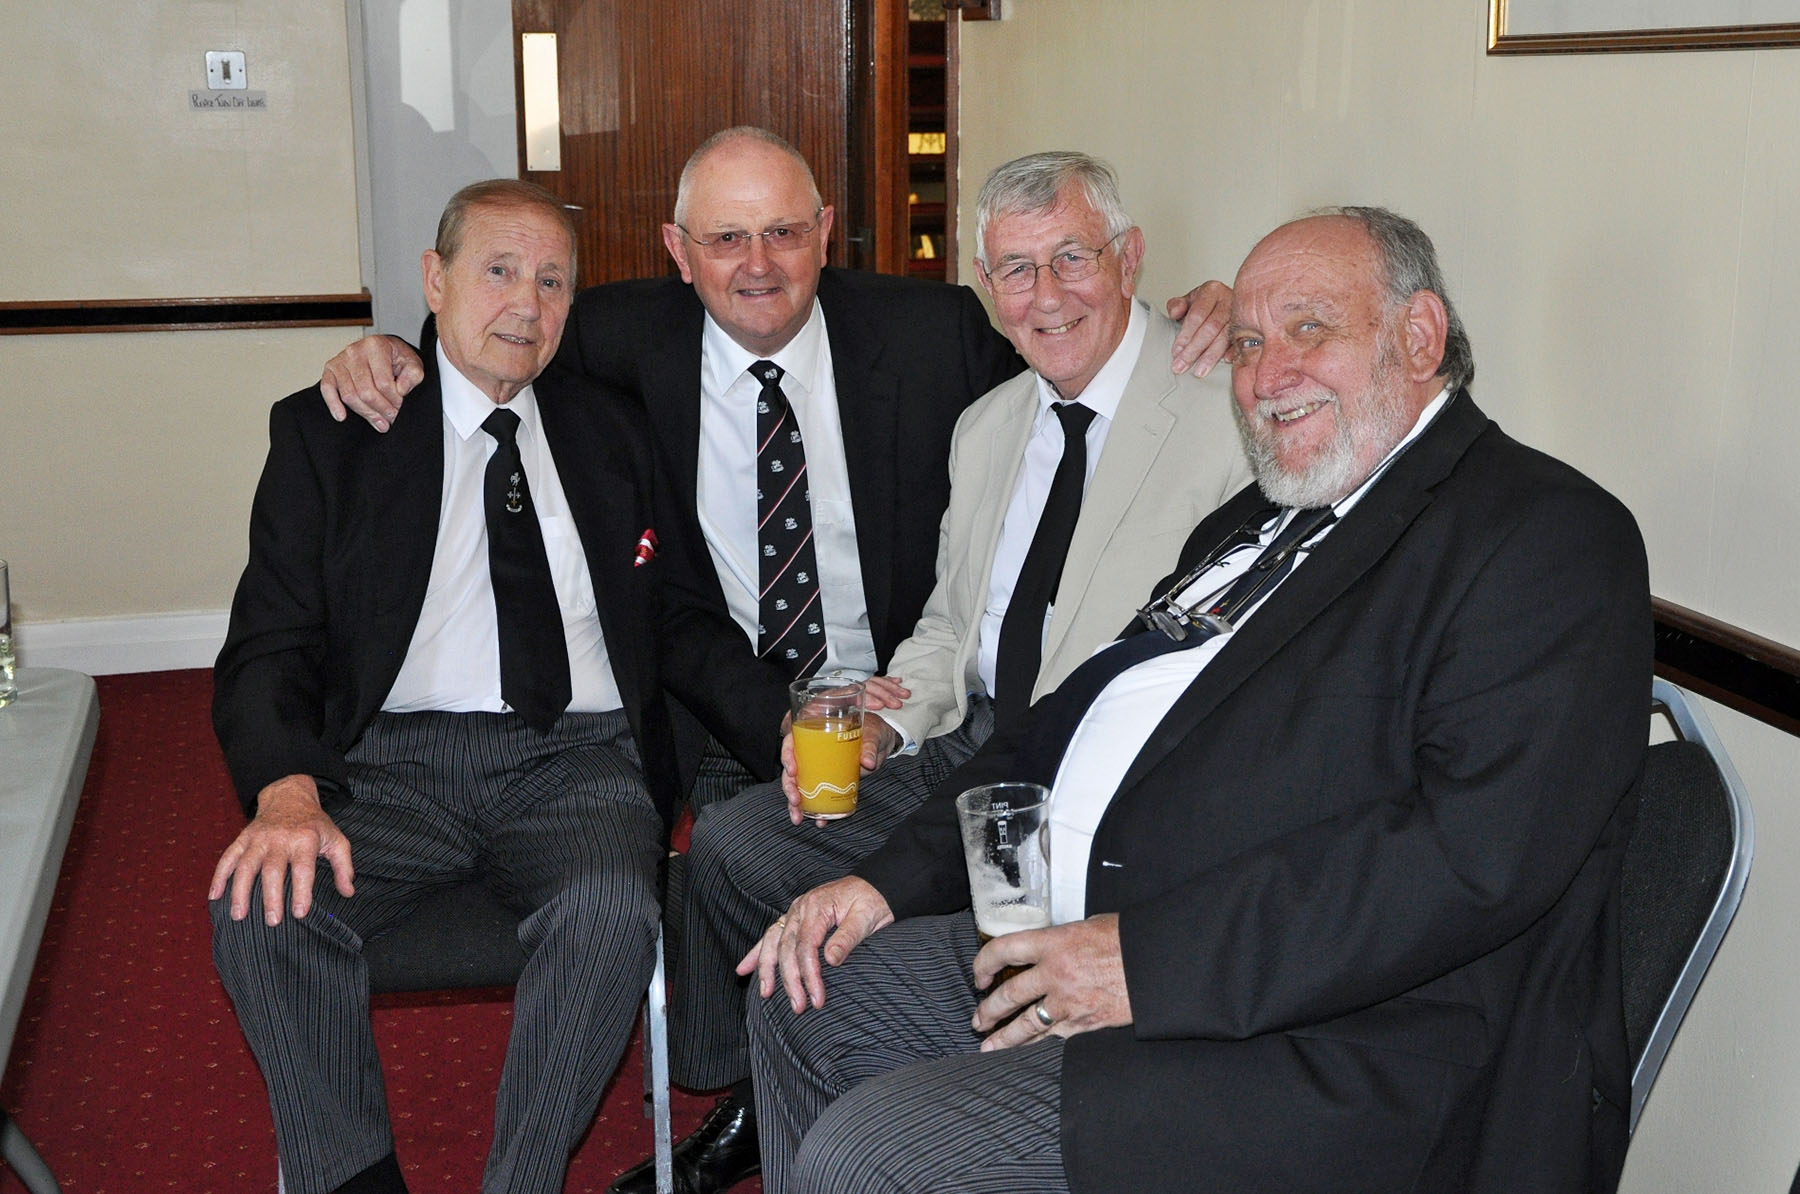 A visit to the Provincial Priory of Middlesex Meeting